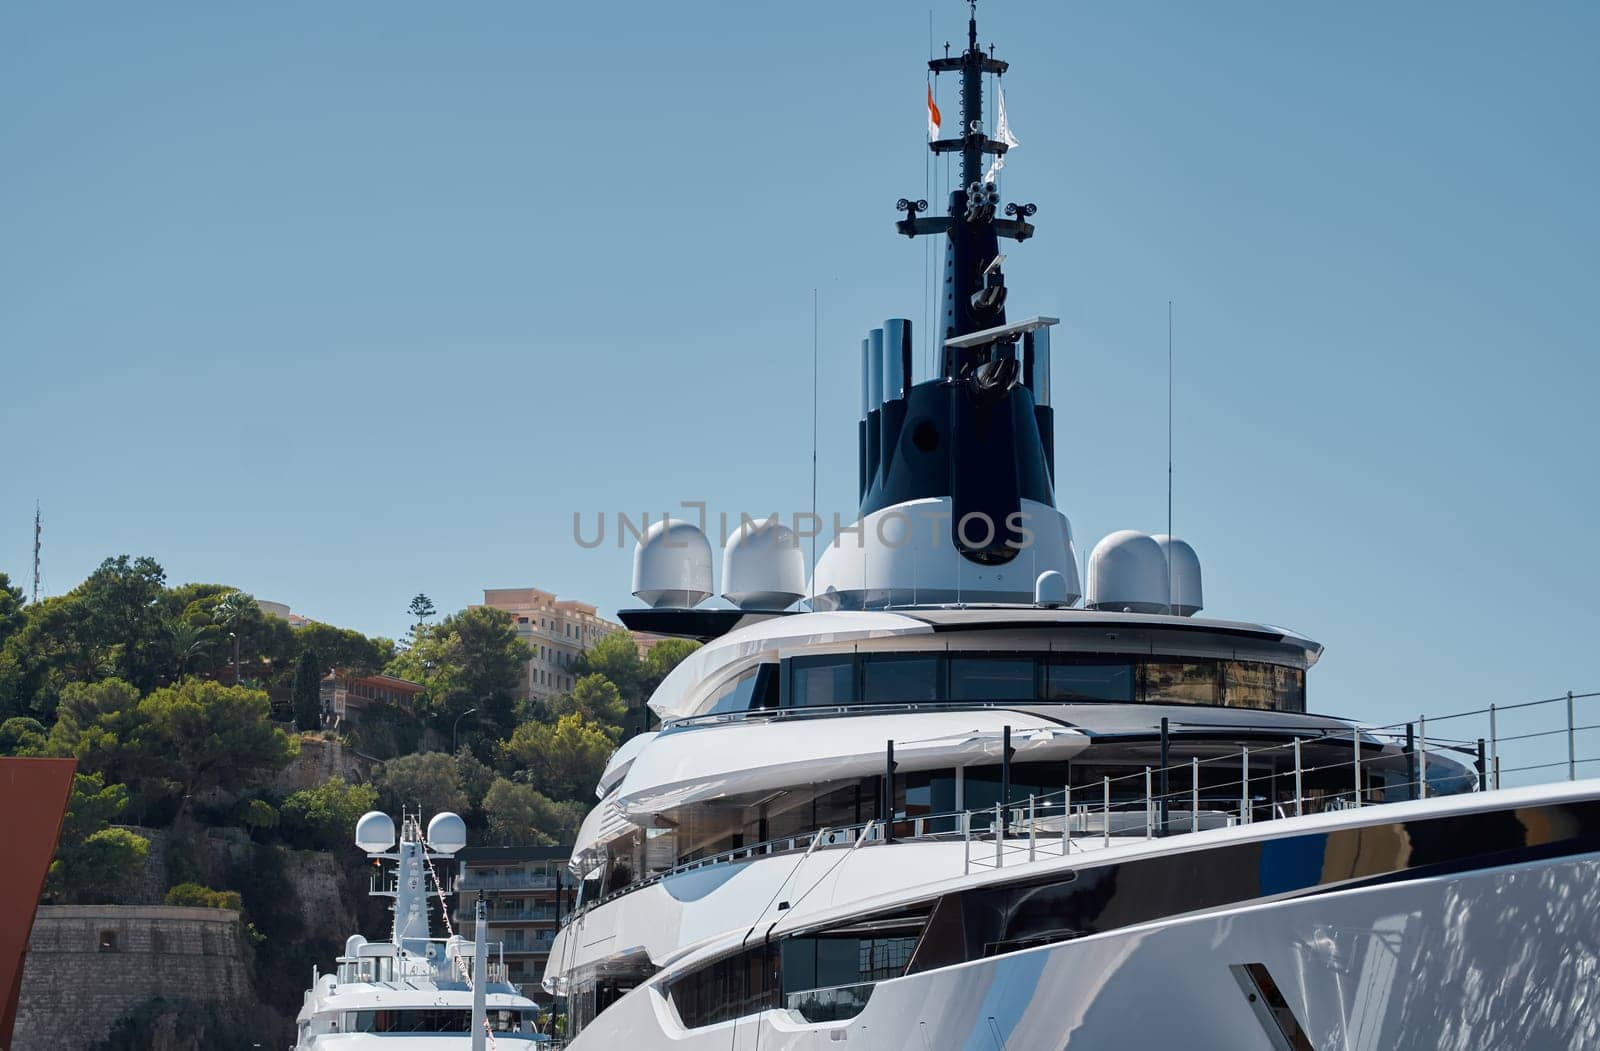 Few huge luxury yachts at the famous motorboat exhibition in the principality of Monaco, Monte Carlo, the most expensive boats for the richest people, mountain and residential complex on background by vladimirdrozdin